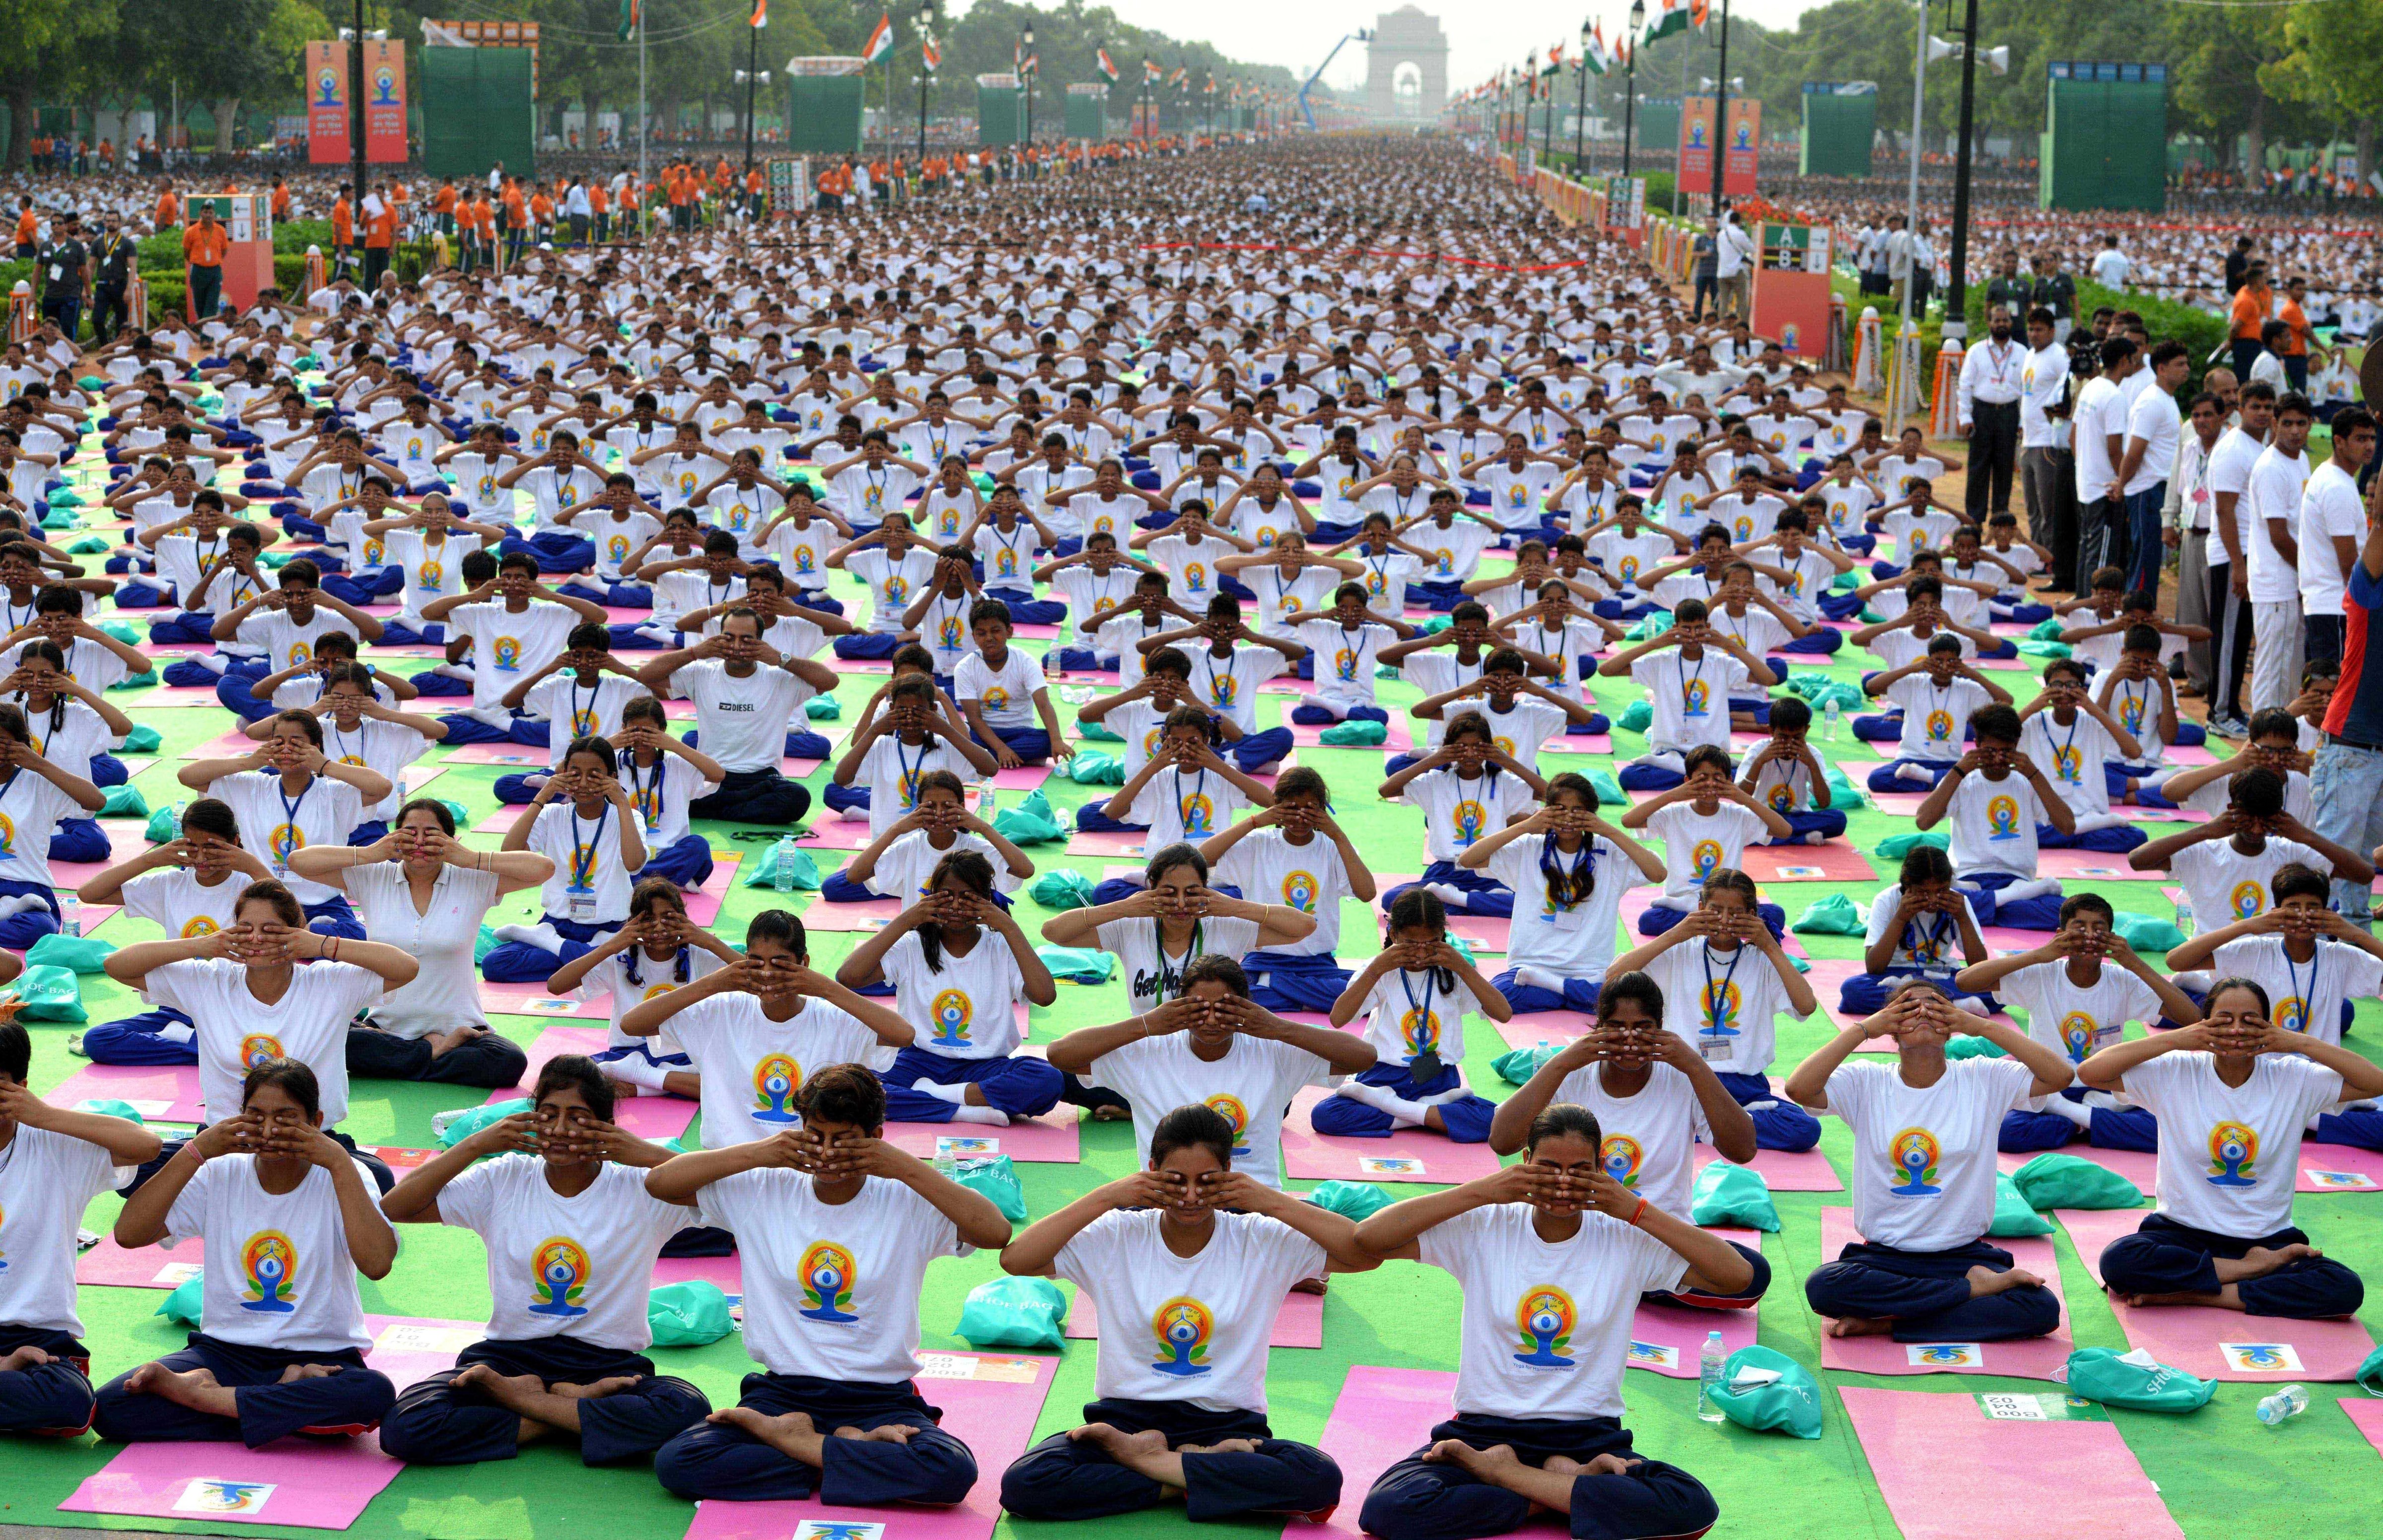 Thousands gather for a mass yoga session to mark International Yoga Day on June 21, 2015, at Rajpath in New Delhi (Vinod Singh—Anadolu Agency/Getty Images)